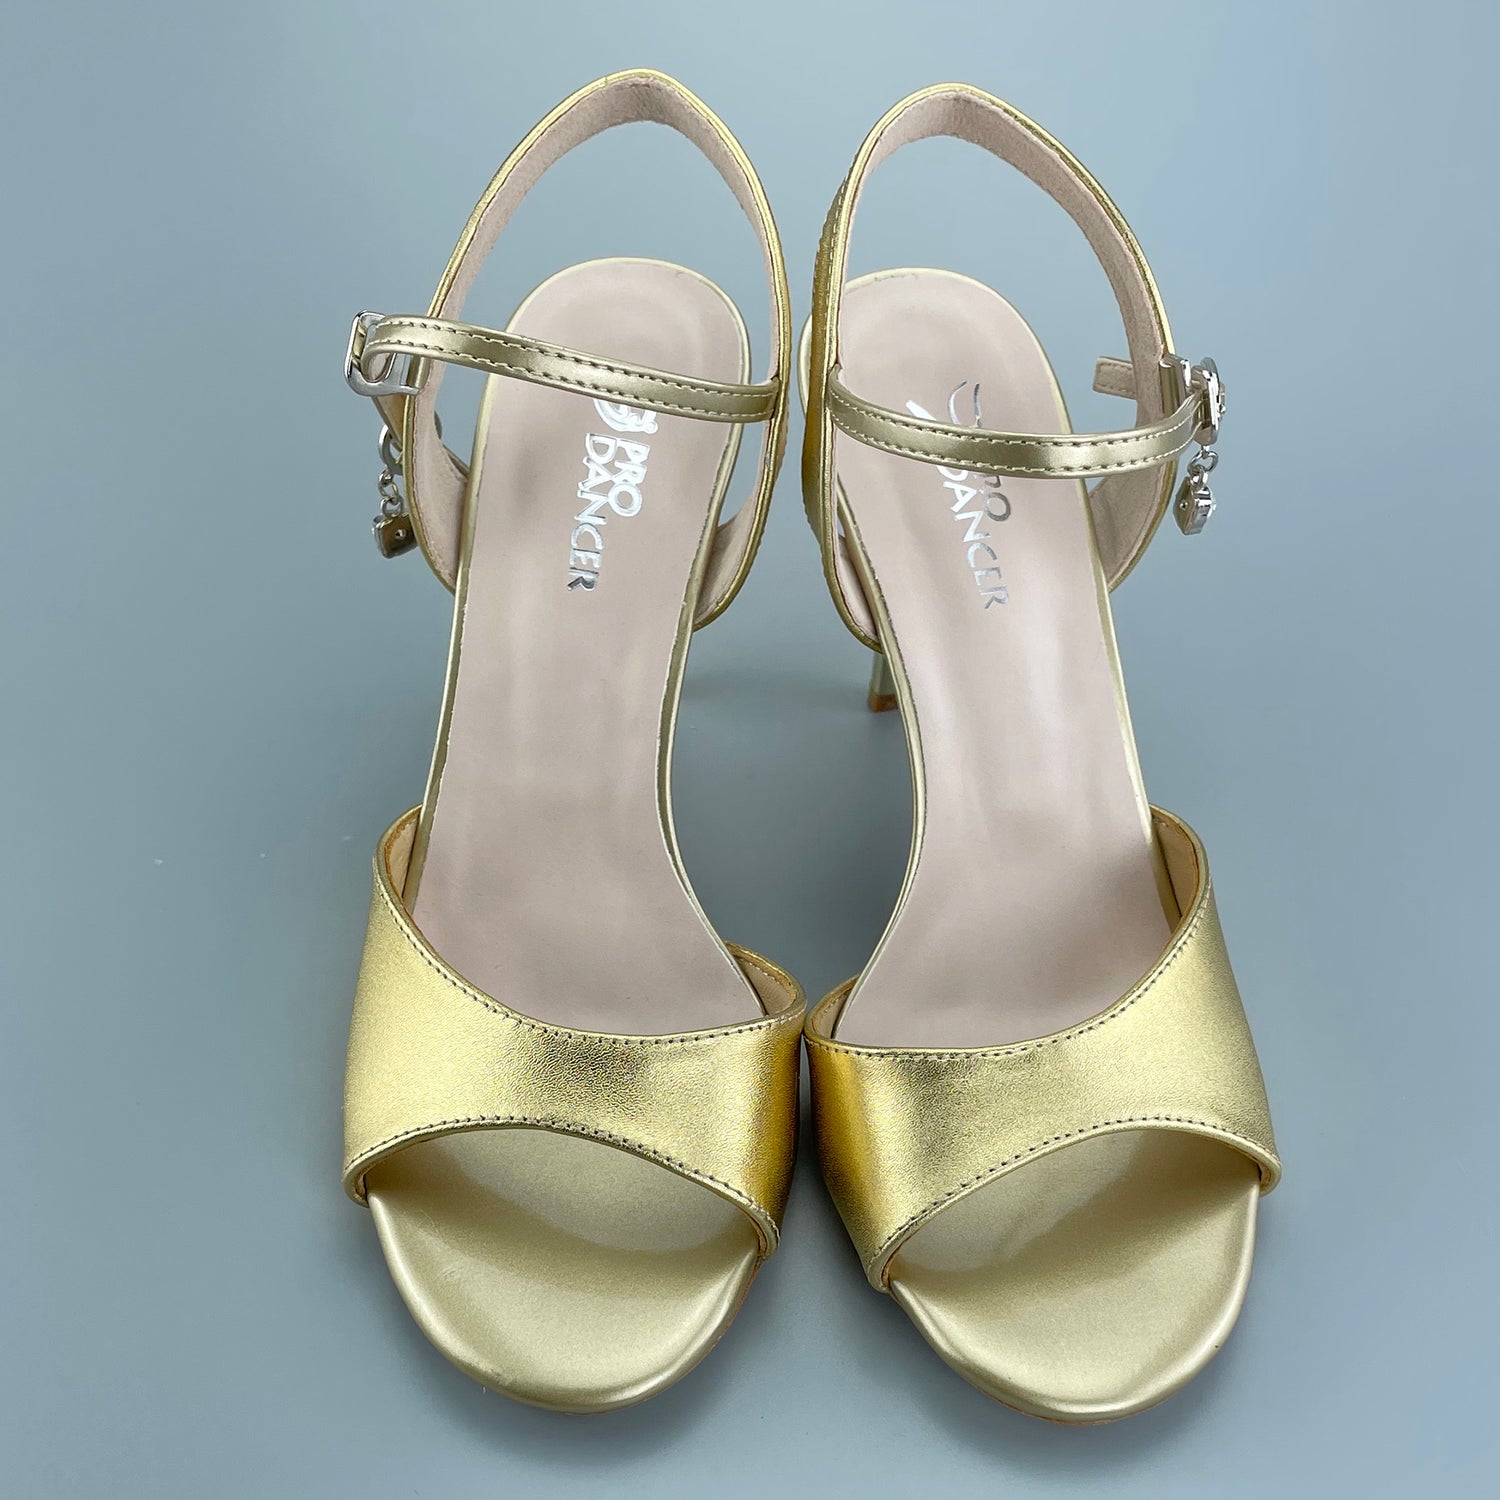 Gold Pro Dancer Tango Shoes open-toe high heels with hard leather sole7